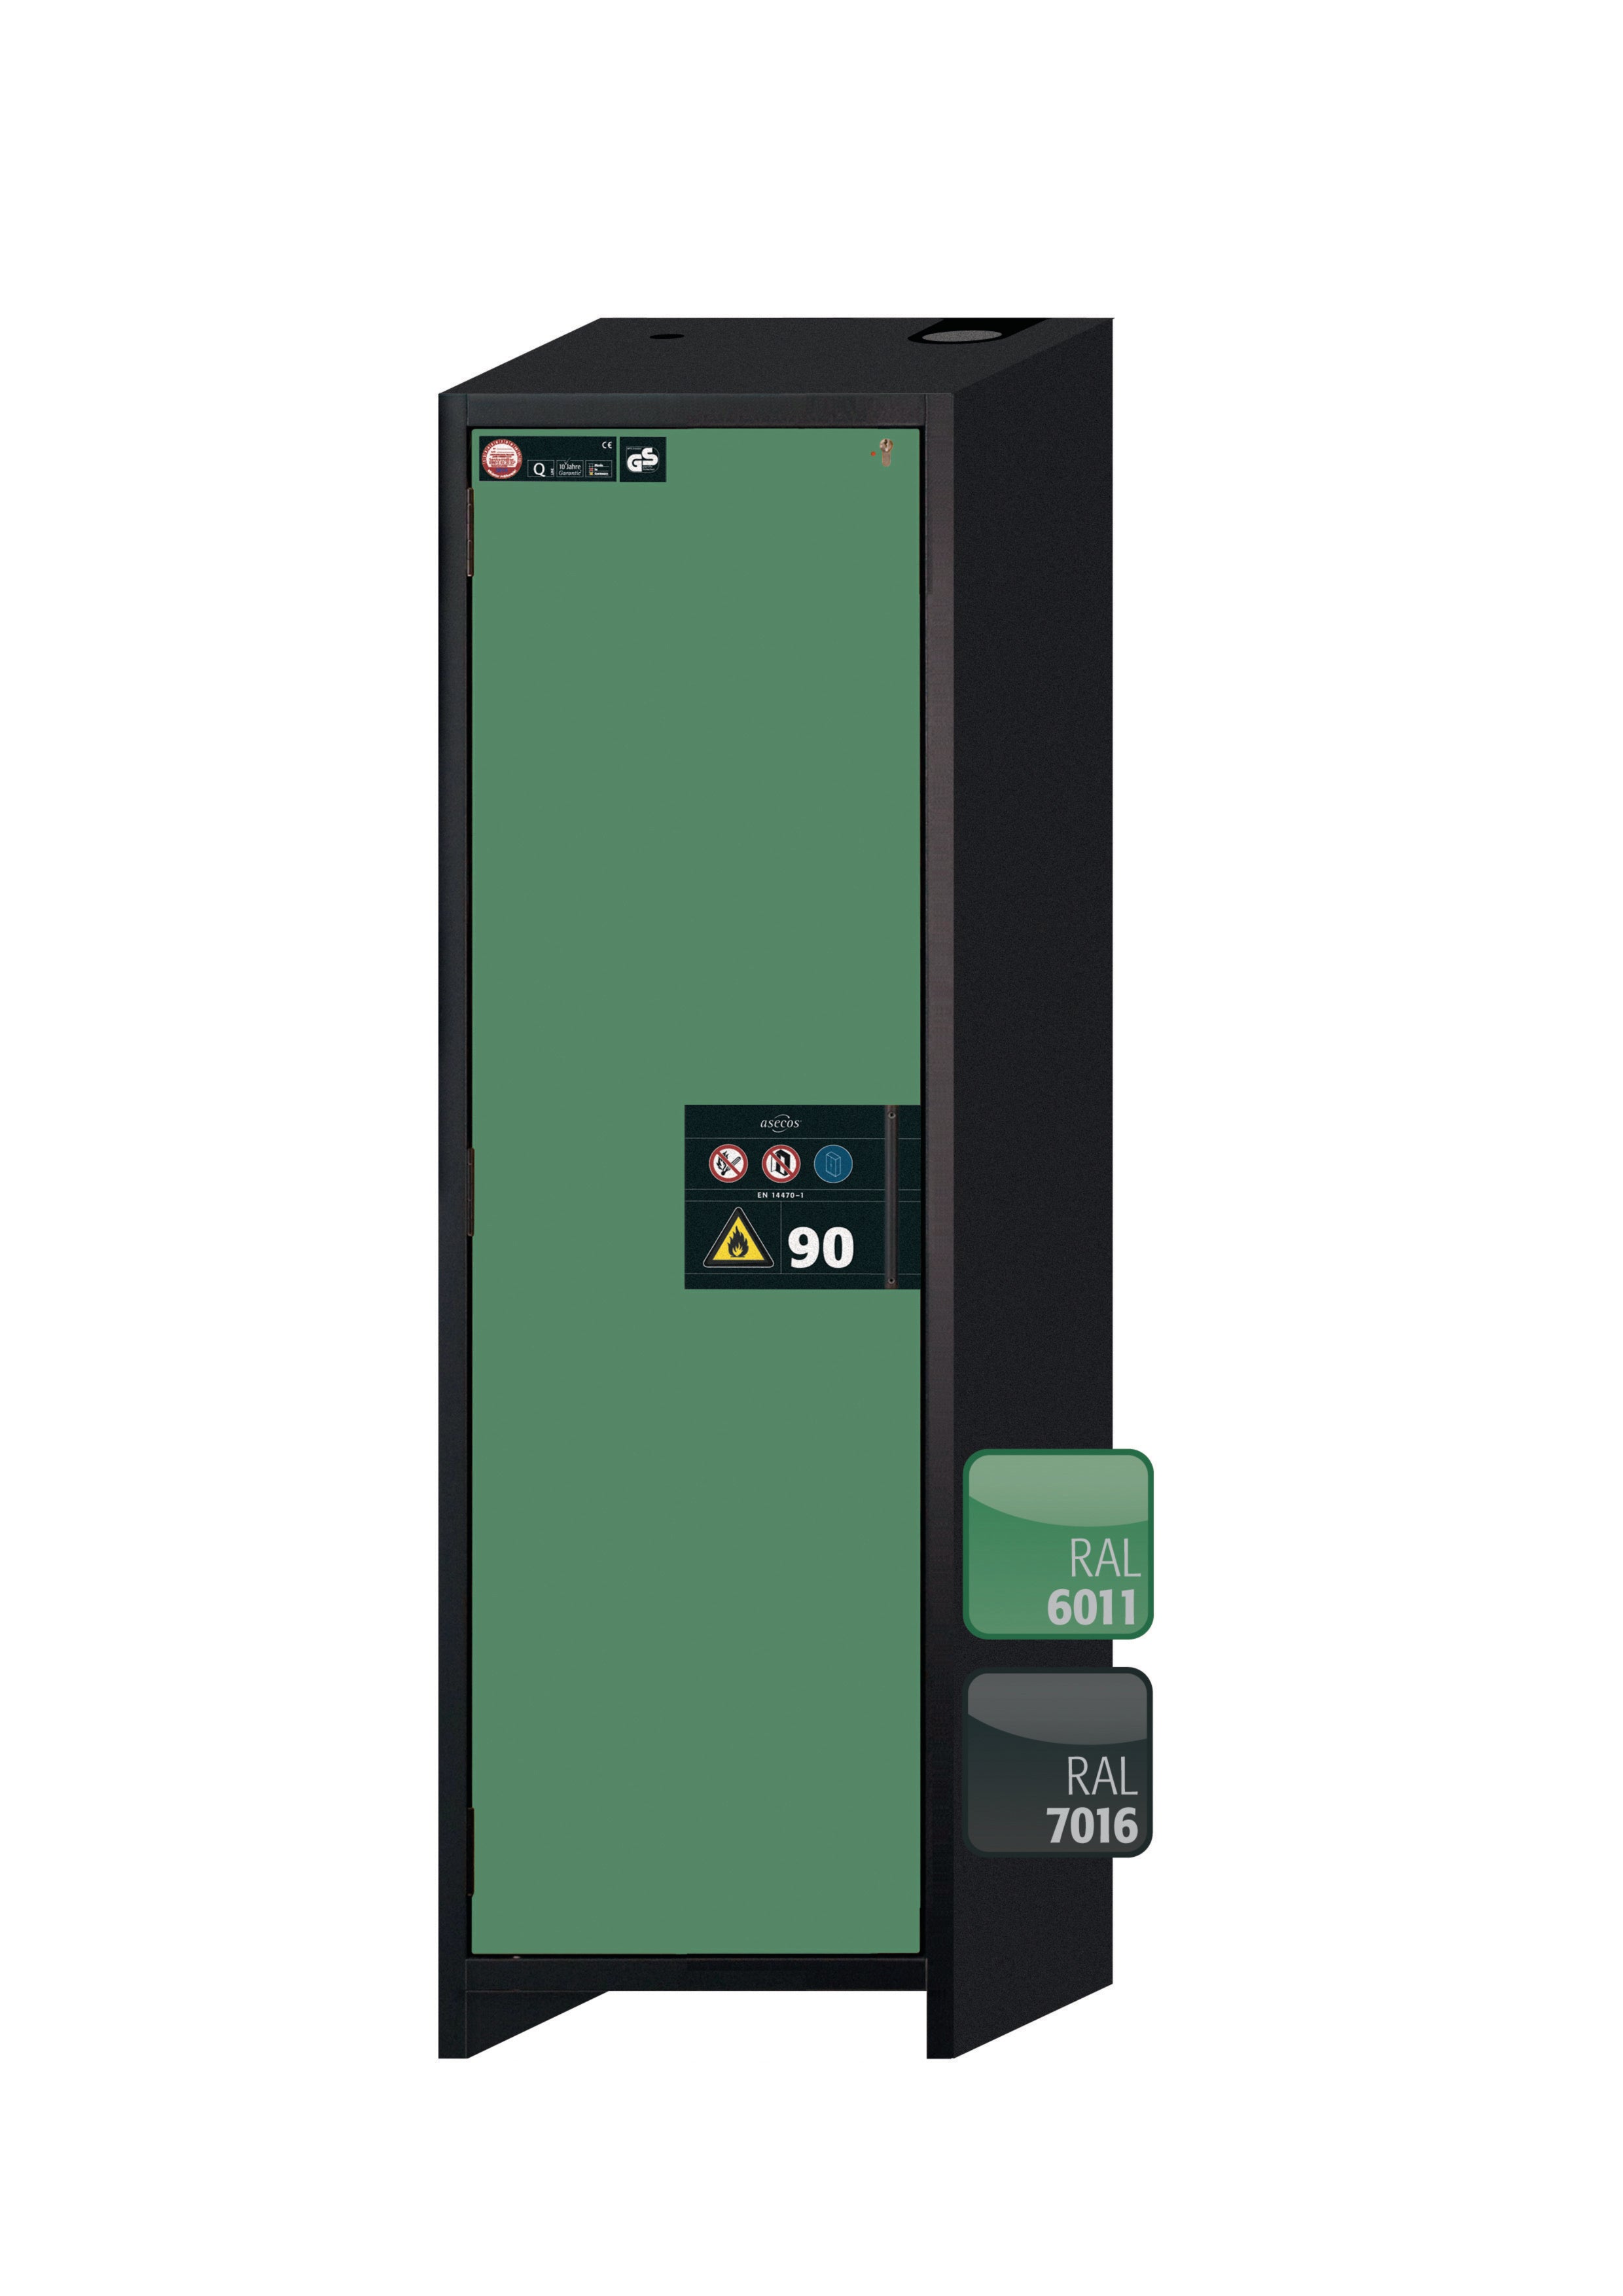 Type 90 safety storage cabinet Q-CLASSIC-90 model Q90.195.060 in reseda green RAL 6011 with 2x tray shelf (standard) (stainless steel 1.4301),